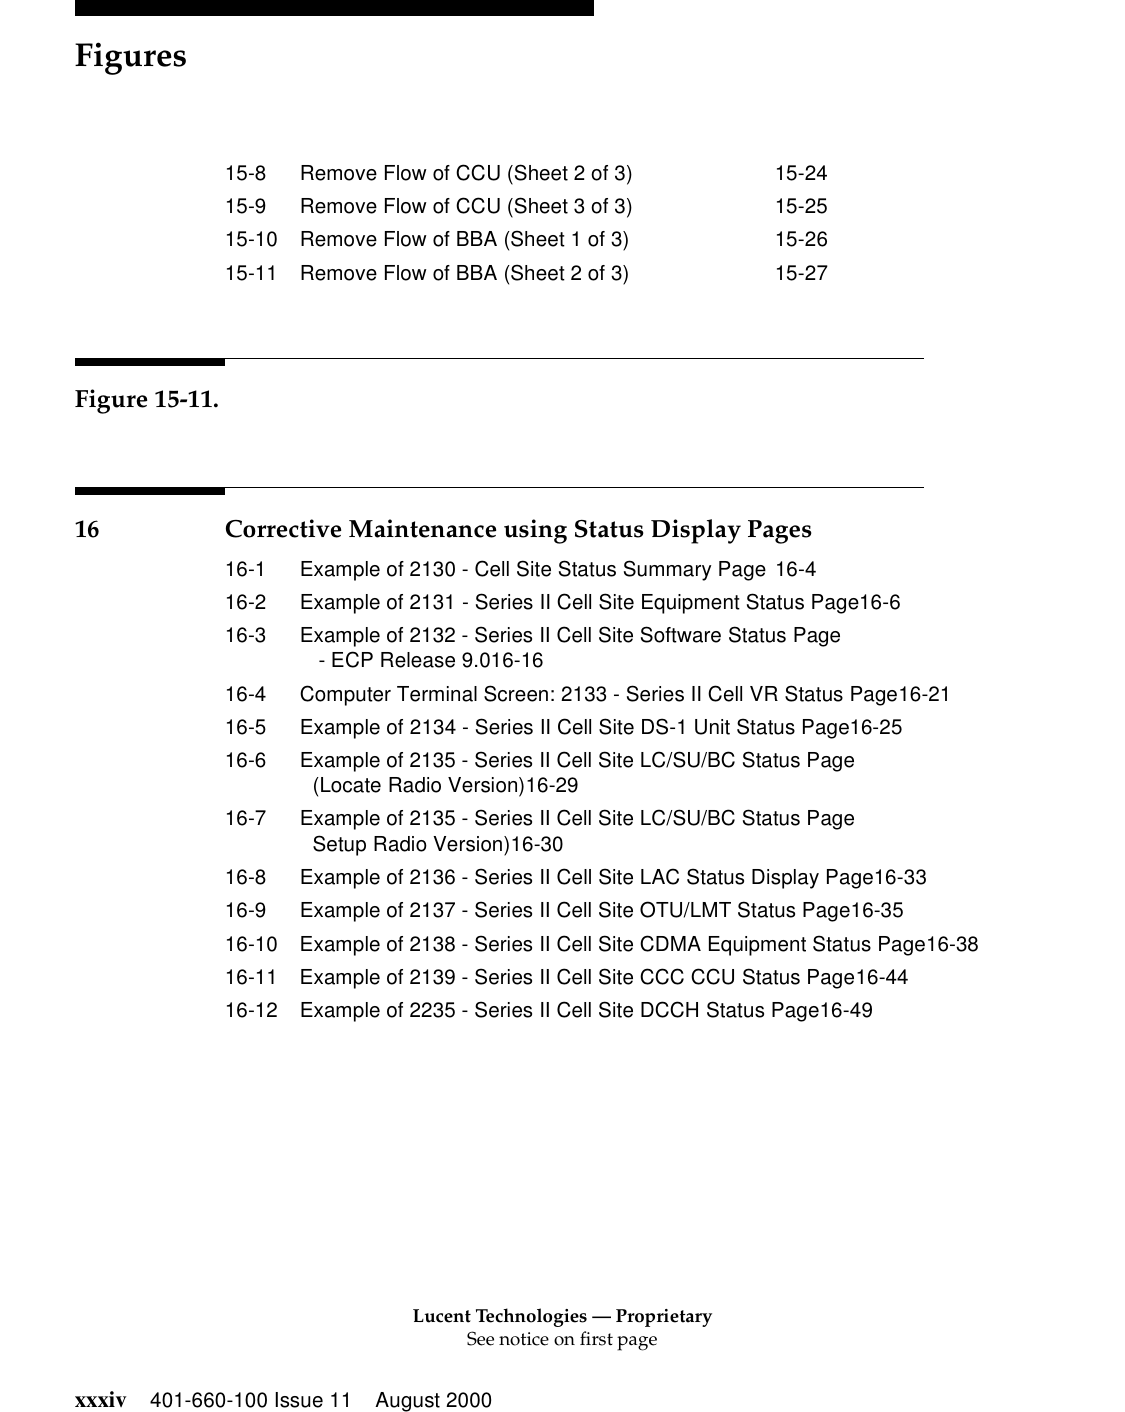 Lucent Technologies — ProprietarySee notice on first pageFiguresxxxiv 401-660-100 Issue 11 August 200015-8 Remove Flow of CCU (Sheet 2 of 3) 15-2415-9 Remove Flow of CCU (Sheet 3 of 3) 15-2515-10 Remove Flow of BBA (Sheet 1 of 3) 15-2615-11 Remove Flow of BBA (Sheet 2 of 3) 15-27Figure 15-11.16 Corrective Maintenance using Status Display Pages16-1 Example of 2130 - Cell Site Status Summary Page 16-416-2 Example of 2131 - Series II Cell Site Equipment Status Page16-616-3 Example of 2132 - Series II Cell Site Software Status Page - ECP Release 9.016-1616-4 Computer Terminal Screen: 2133 - Series II Cell VR Status Page16-2116-5 Example of 2134 - Series II Cell Site DS-1 Unit Status Page16-2516-6 Example of 2135 - Series II Cell Site LC/SU/BC Status Page(Locate Radio Version)16-2916-7 Example of 2135 - Series II Cell Site LC/SU/BC Status PageSetup Radio Version)16-3016-8 Example of 2136 - Series II Cell Site LAC Status Display Page16-3316-9 Example of 2137 - Series II Cell Site OTU/LMT Status Page16-3516-10 Example of 2138 - Series II Cell Site CDMA Equipment Status Page16-3816-11 Example of 2139 - Series II Cell Site CCC CCU Status Page16-4416-12 Example of 2235 - Series II Cell Site DCCH Status Page16-49